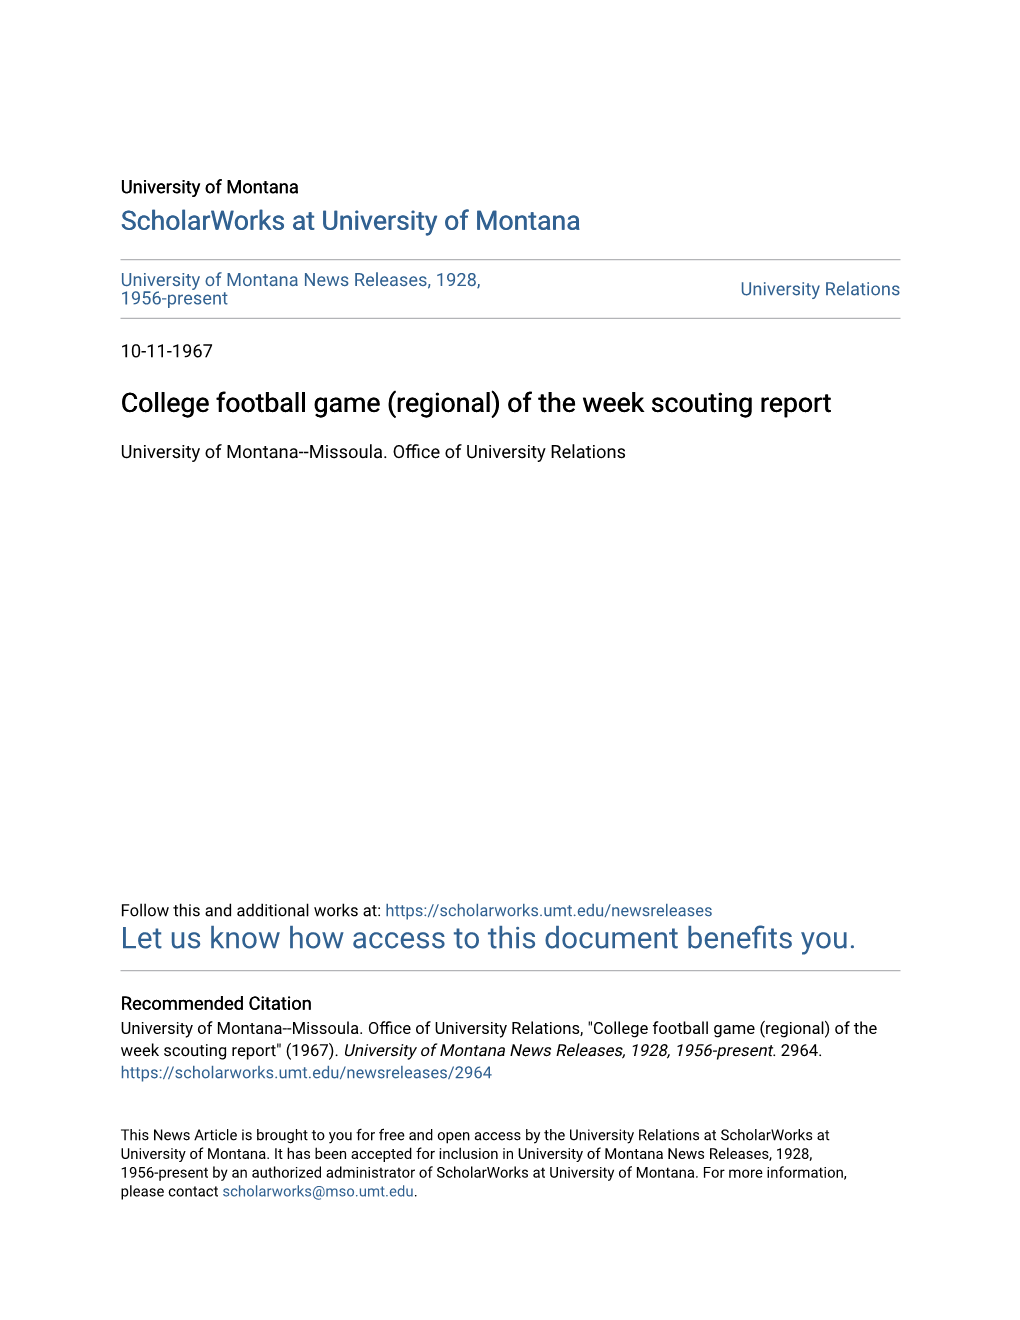 College Football Game (Regional) of the Week Scouting Report